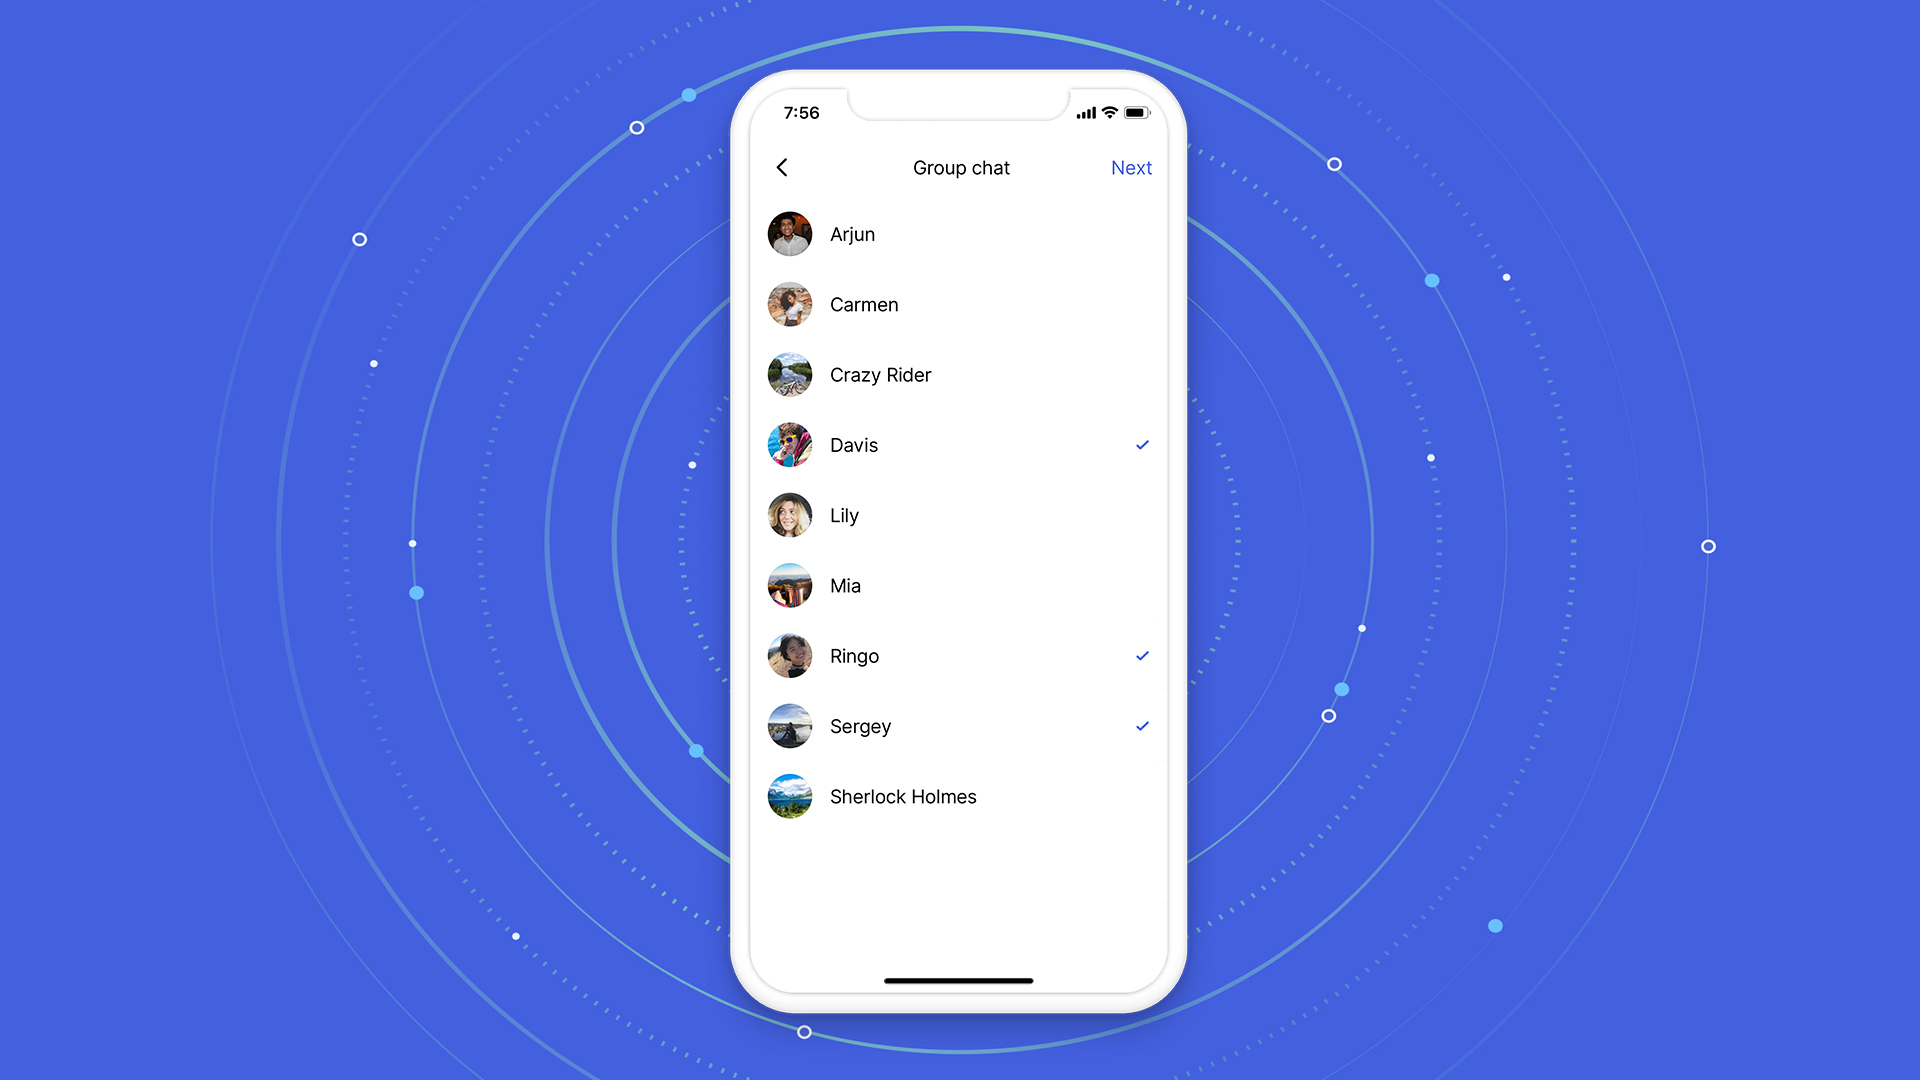 v0.9.32 Release - Private Group Chats